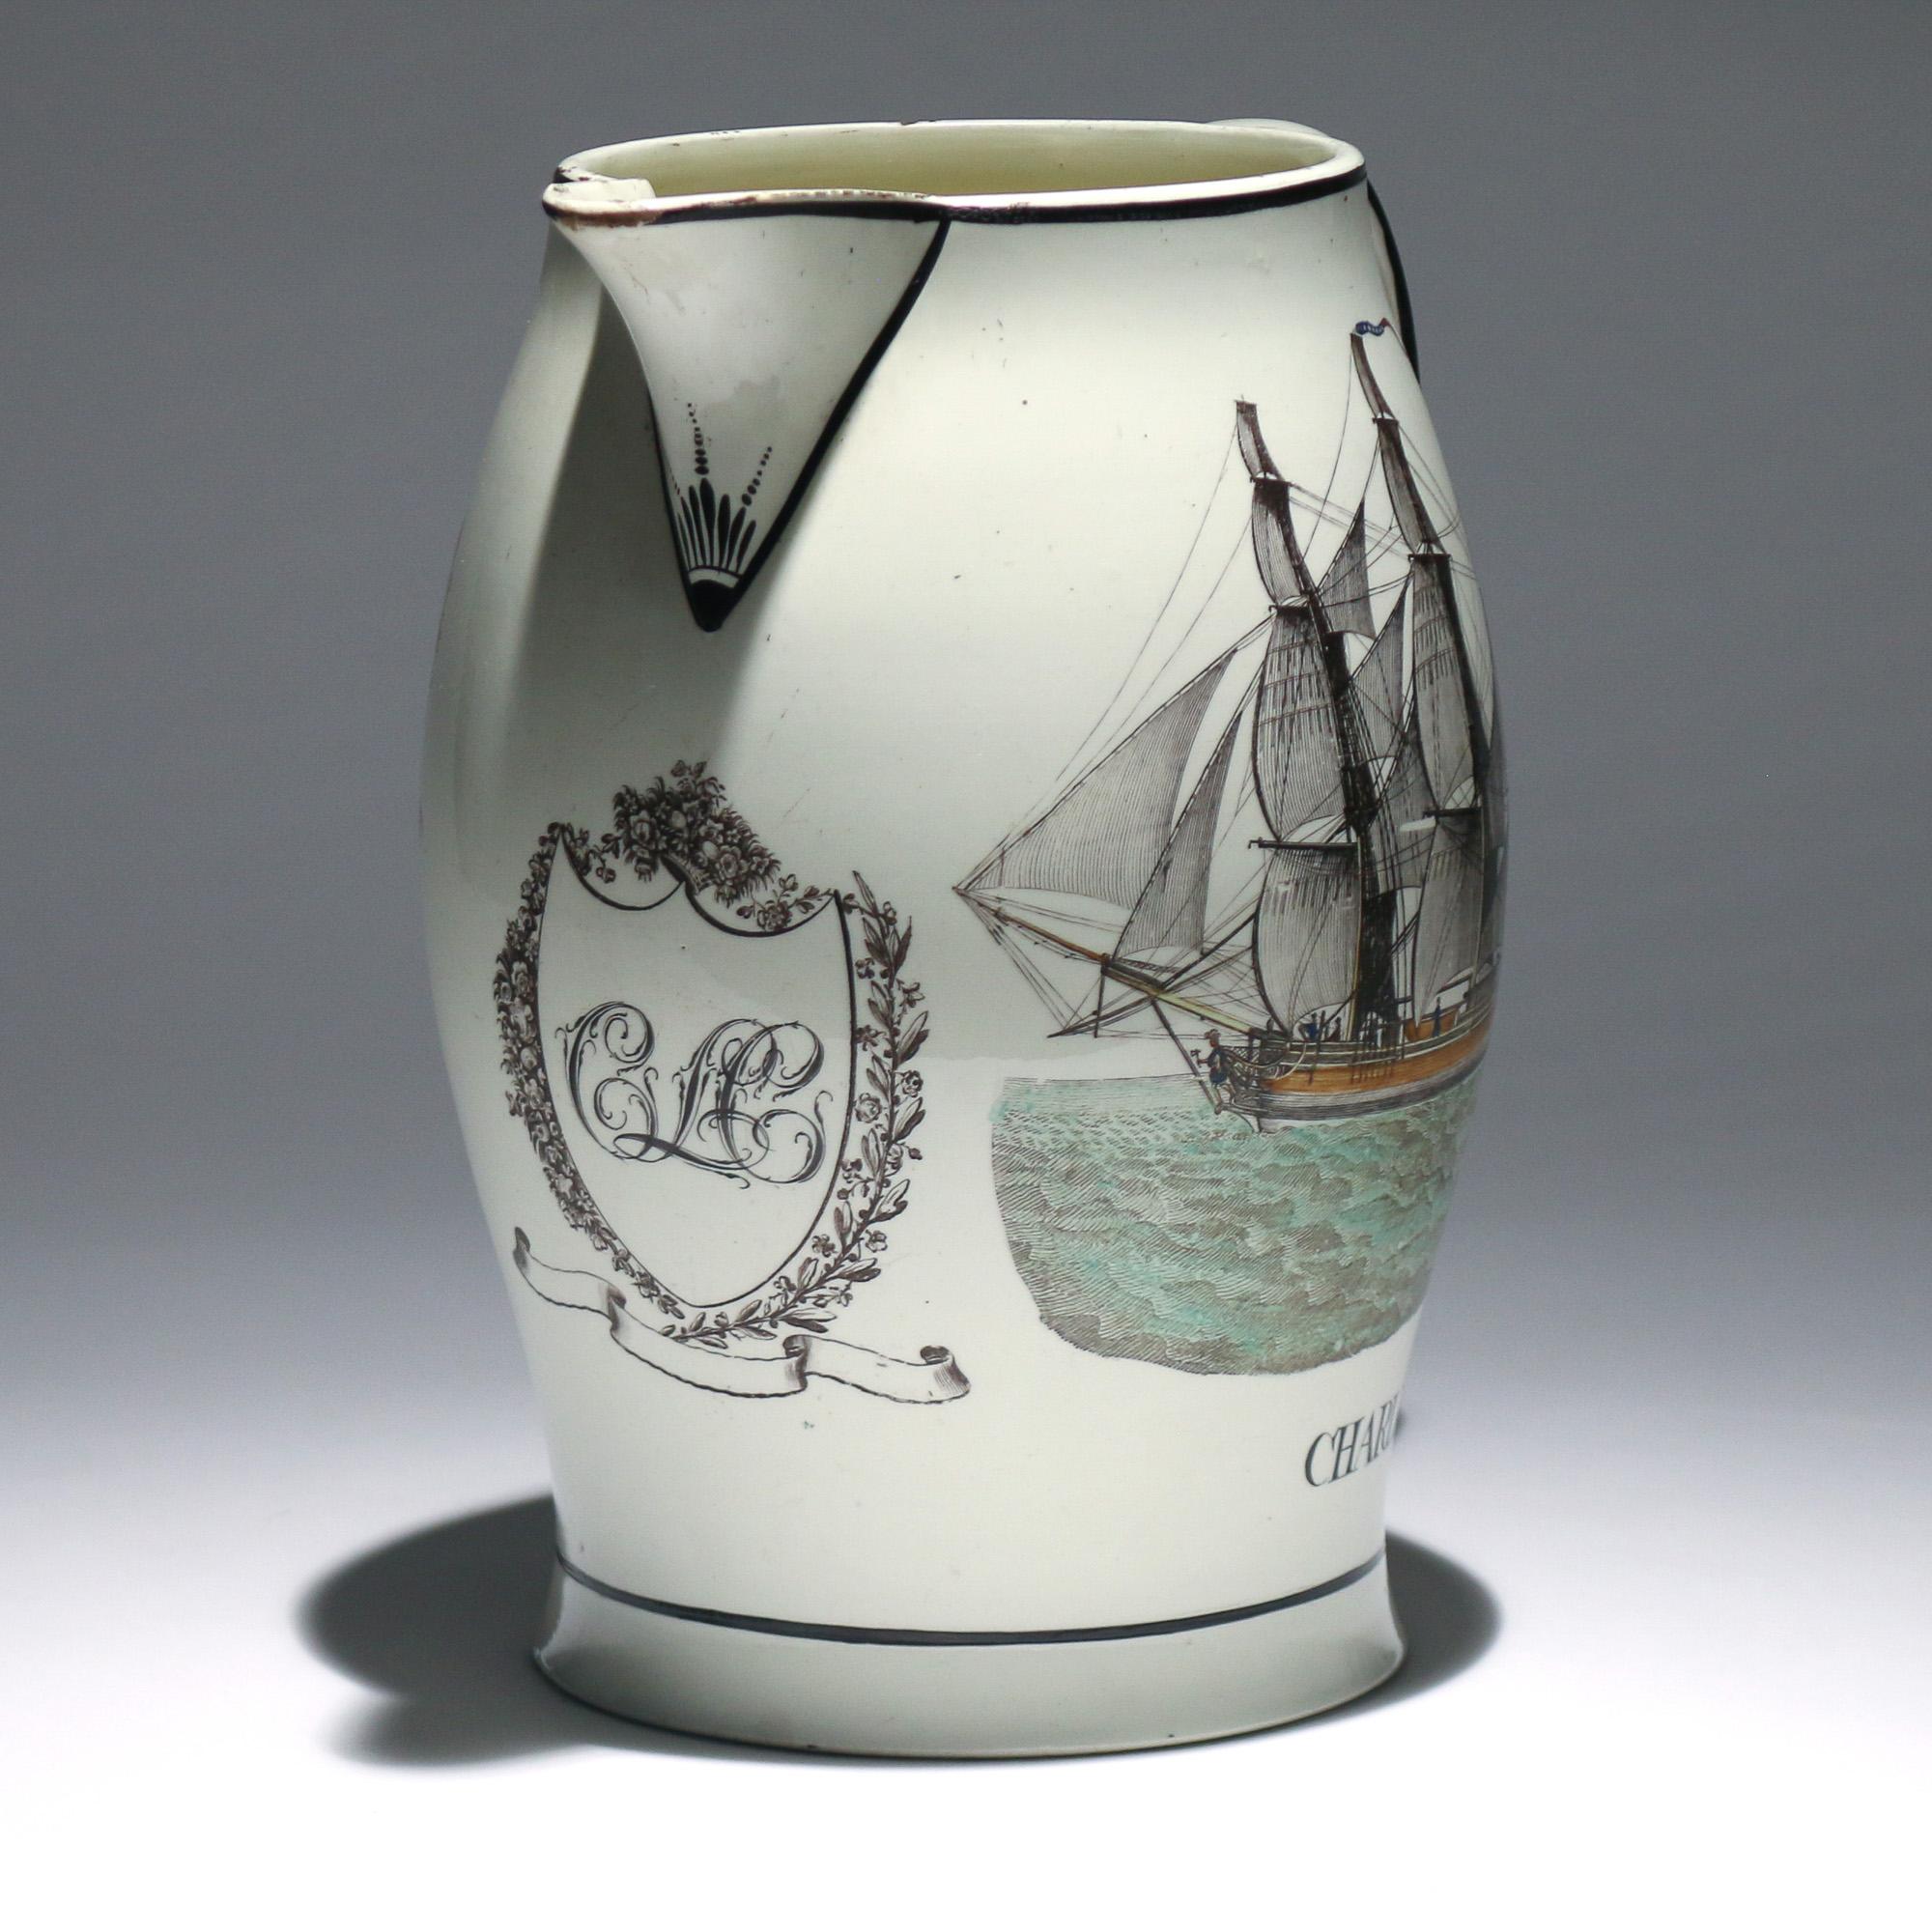 Liverpool creamware jug with an American ship and the name Charles below,
Probably Herculaneum Pottery,
circa 1800-1810.

The large jug with a printed image of an American ship and the name Charles inscribed below. On the reverse side, The